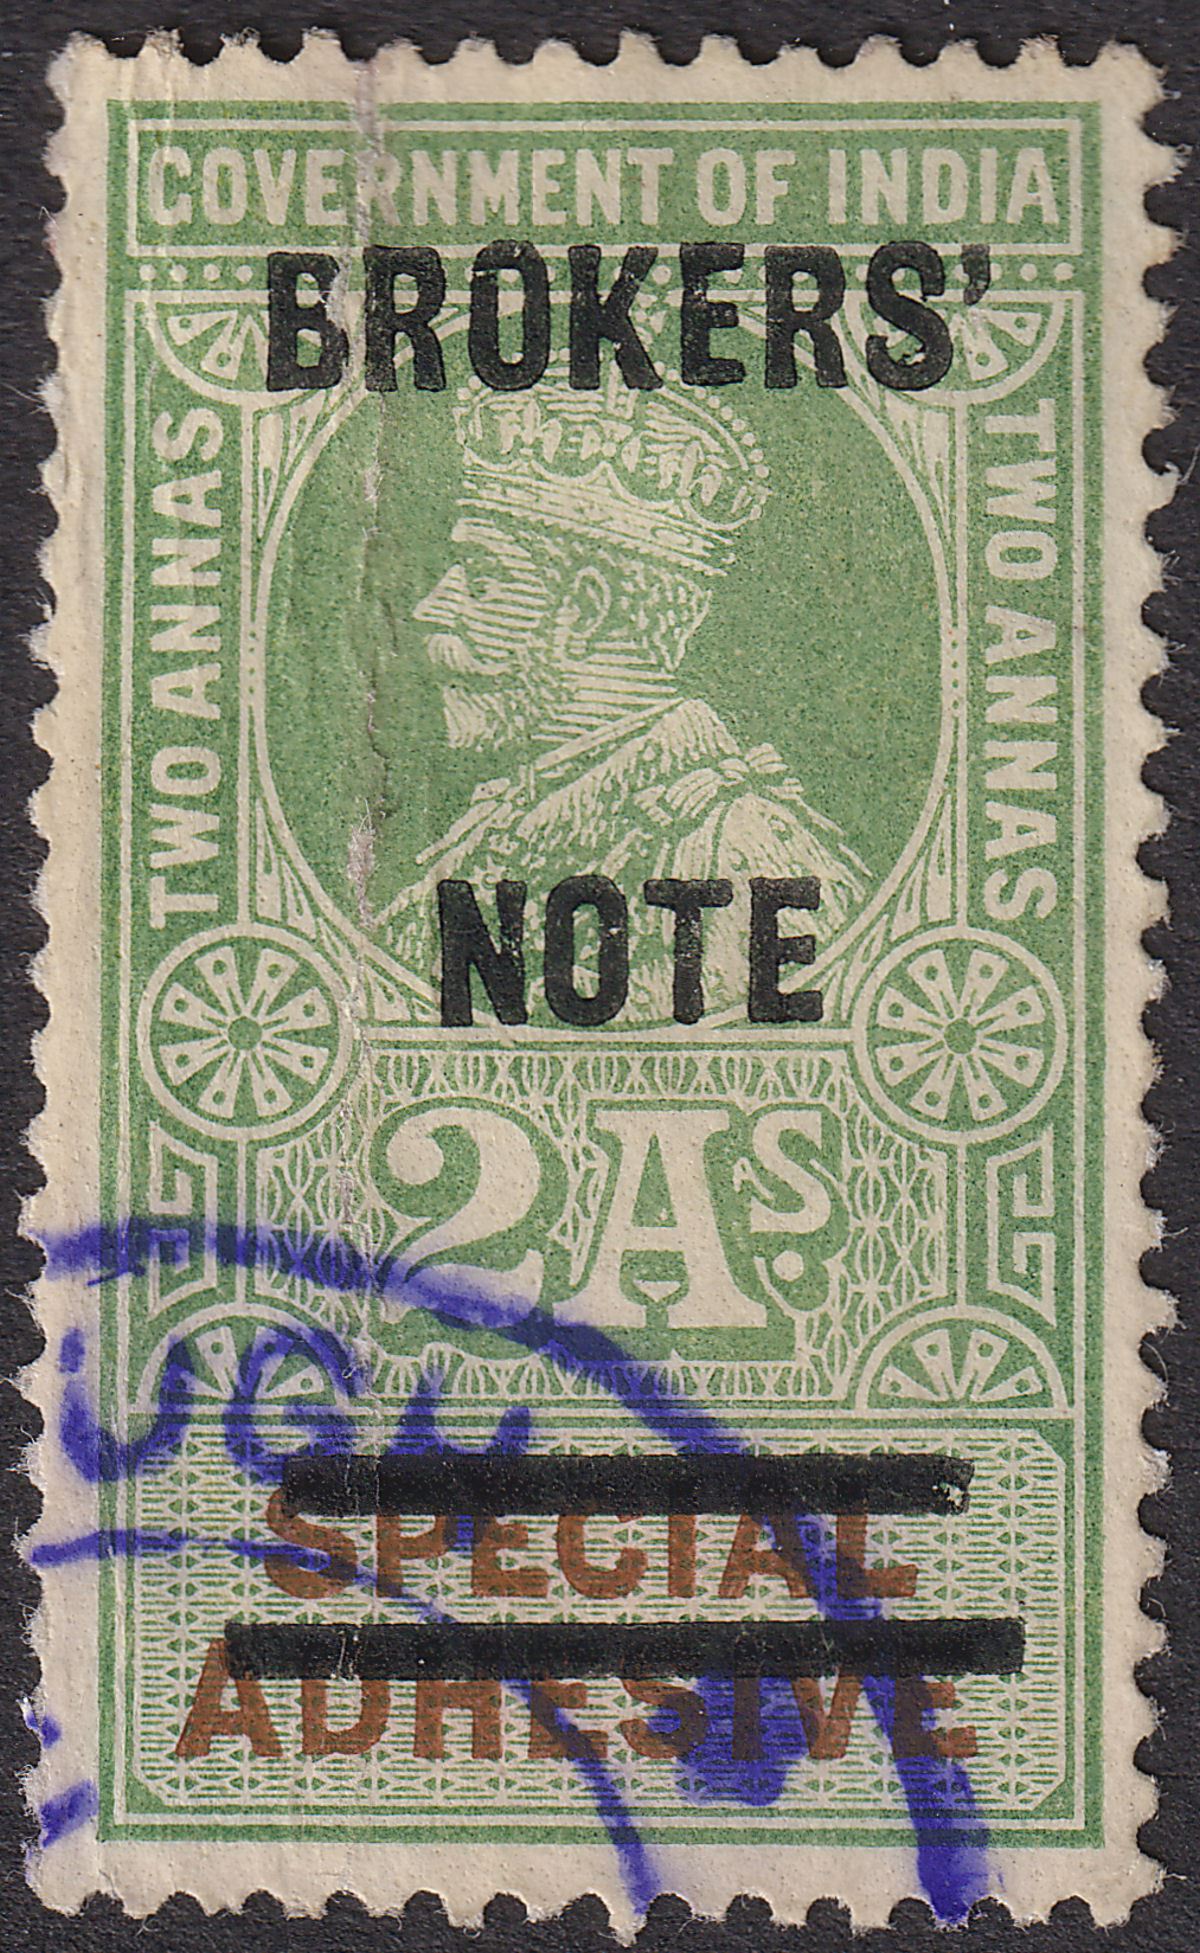 India 1912 KGV Revenue Brokers' Note Provisional Opt 2a Green + Brown Used BF5